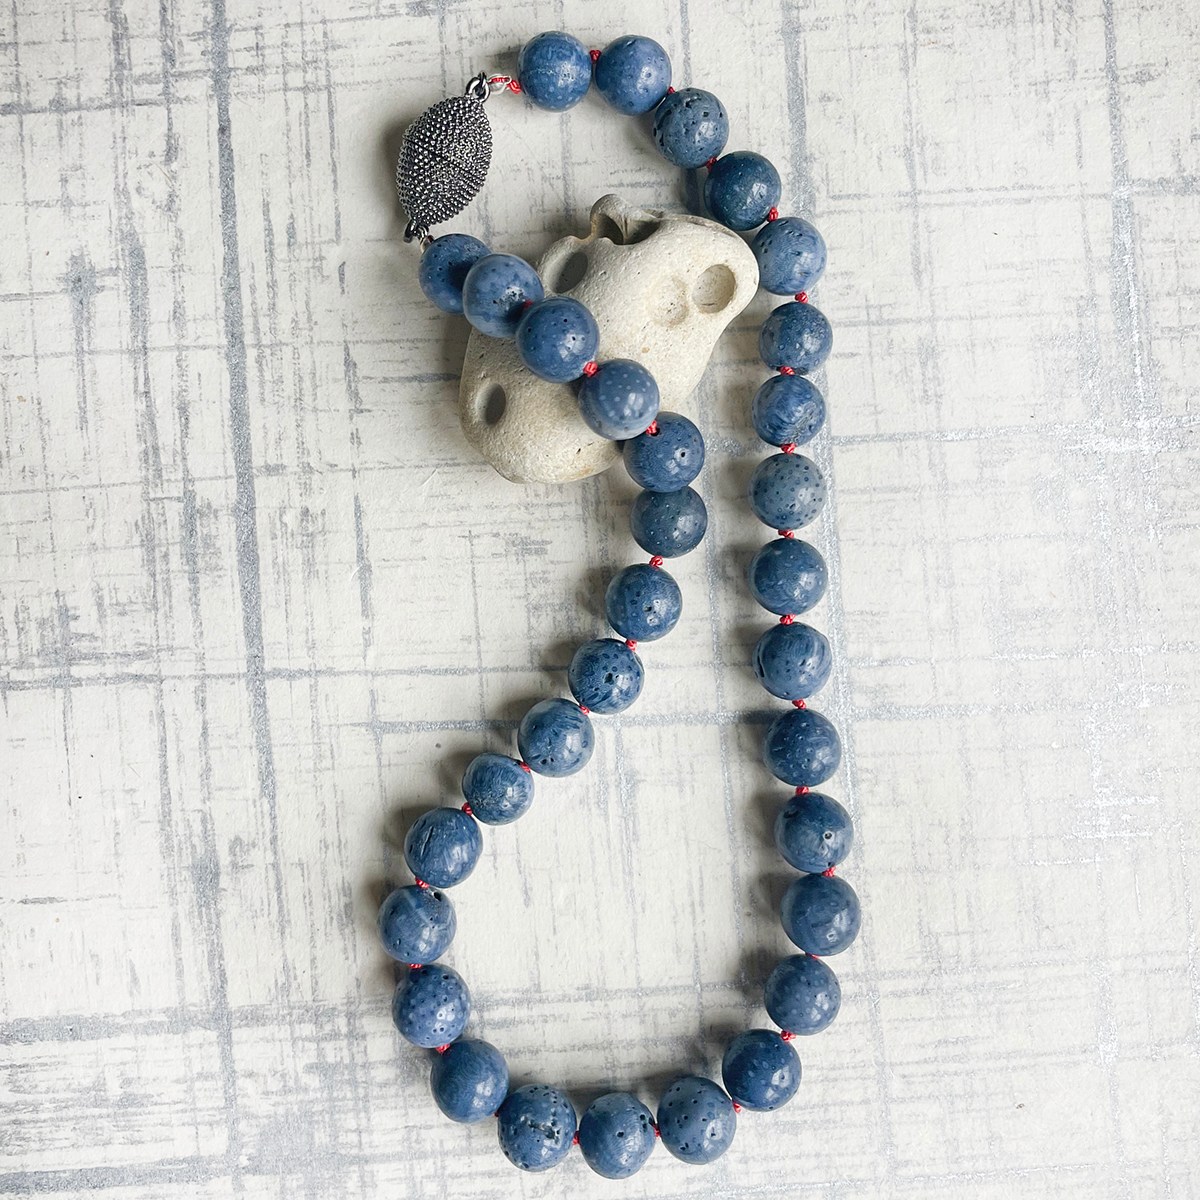 natural blue coral necklace from the collection of Arts & Health at Duke